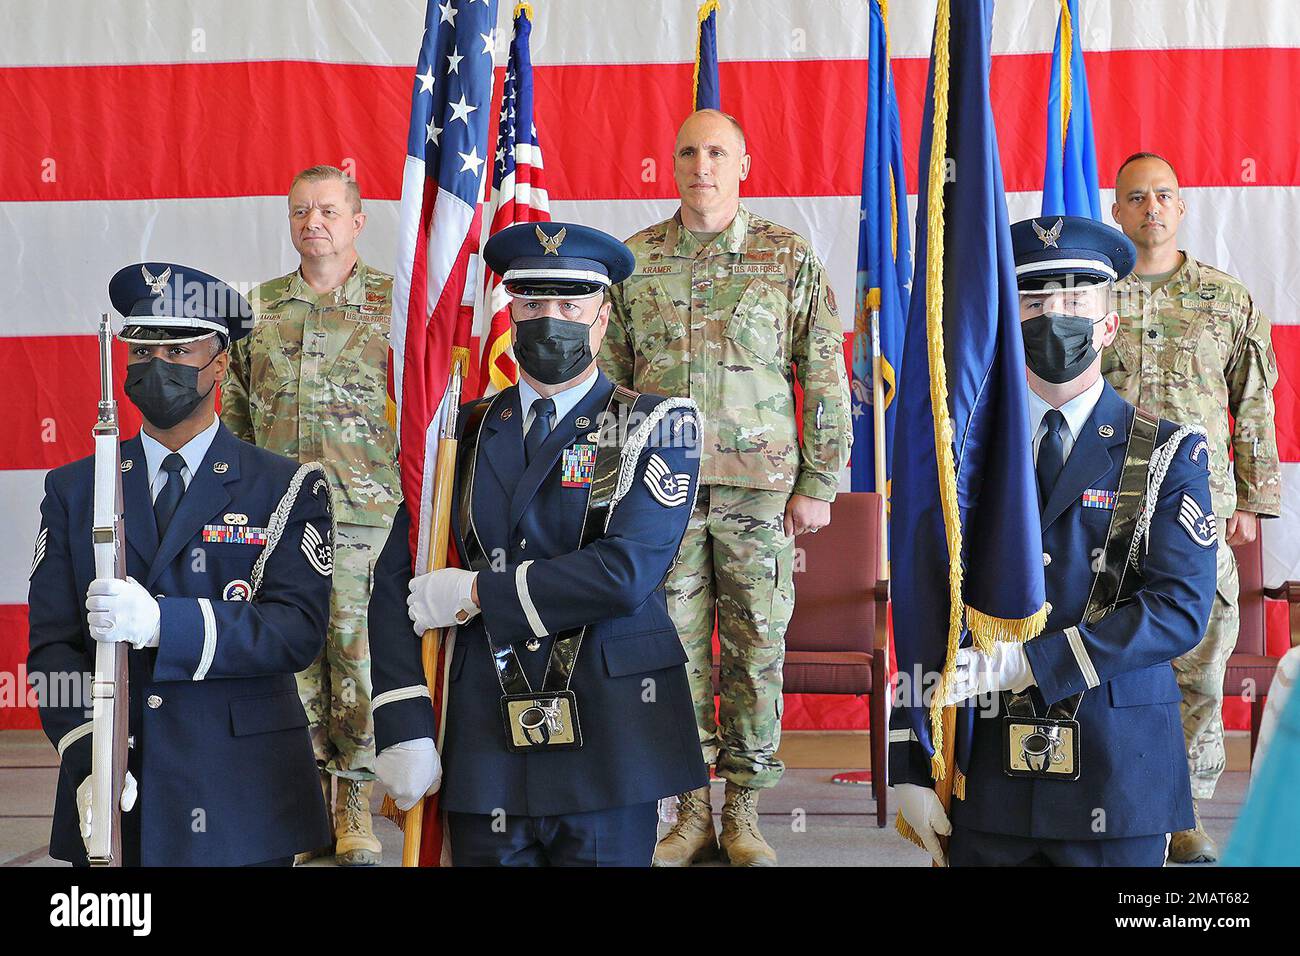 Brig. Gen. Rolf Mammen, commander of the 127th Wing, stands at attention Col. Daniel Kramer, and Lt. Col. Sam Trapasso prior to the 127th Mission Support Group Change of Command ceremony at Selfridge Air National Guard Base, June 4, 2022. Stock Photo